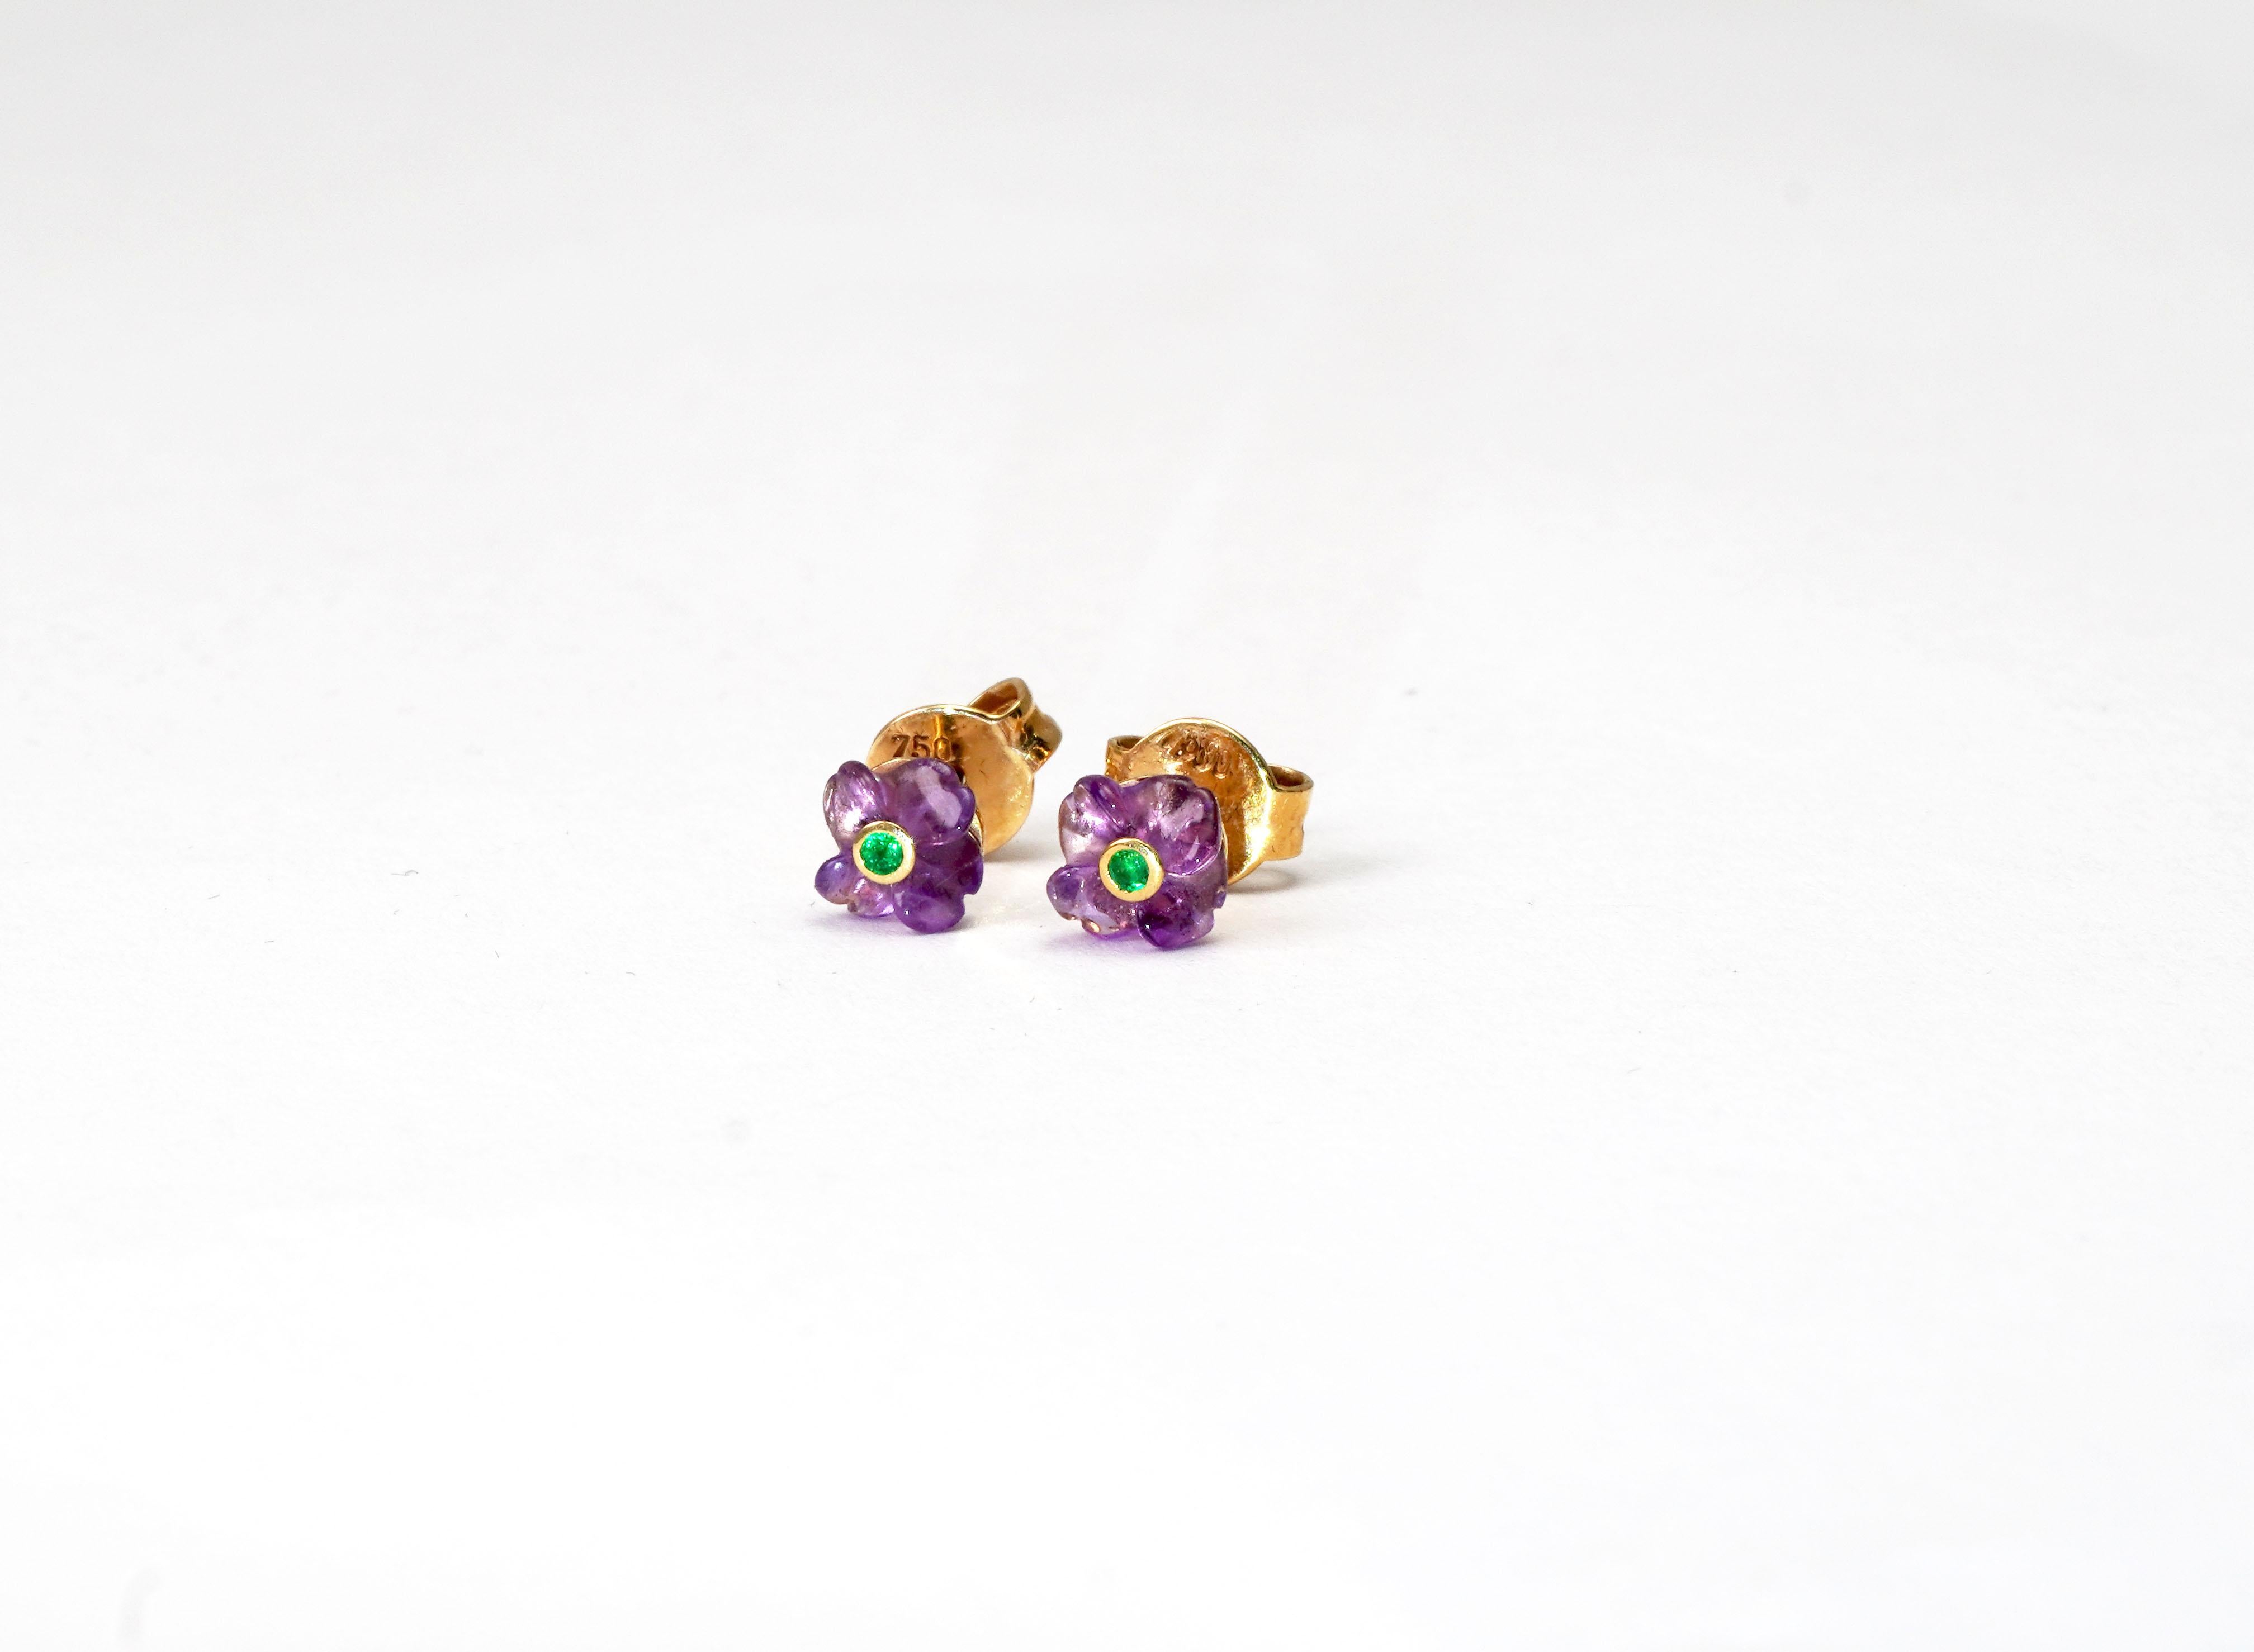 18 kt gold pair of earrings with Amethyst and Emerald
Gold color: Yellow
Total weight: 1.18 grams

Set with:
- Amethyst
Cut: Flower
Color: Purple

- Emerald
Cut: Emerald
Color: Green